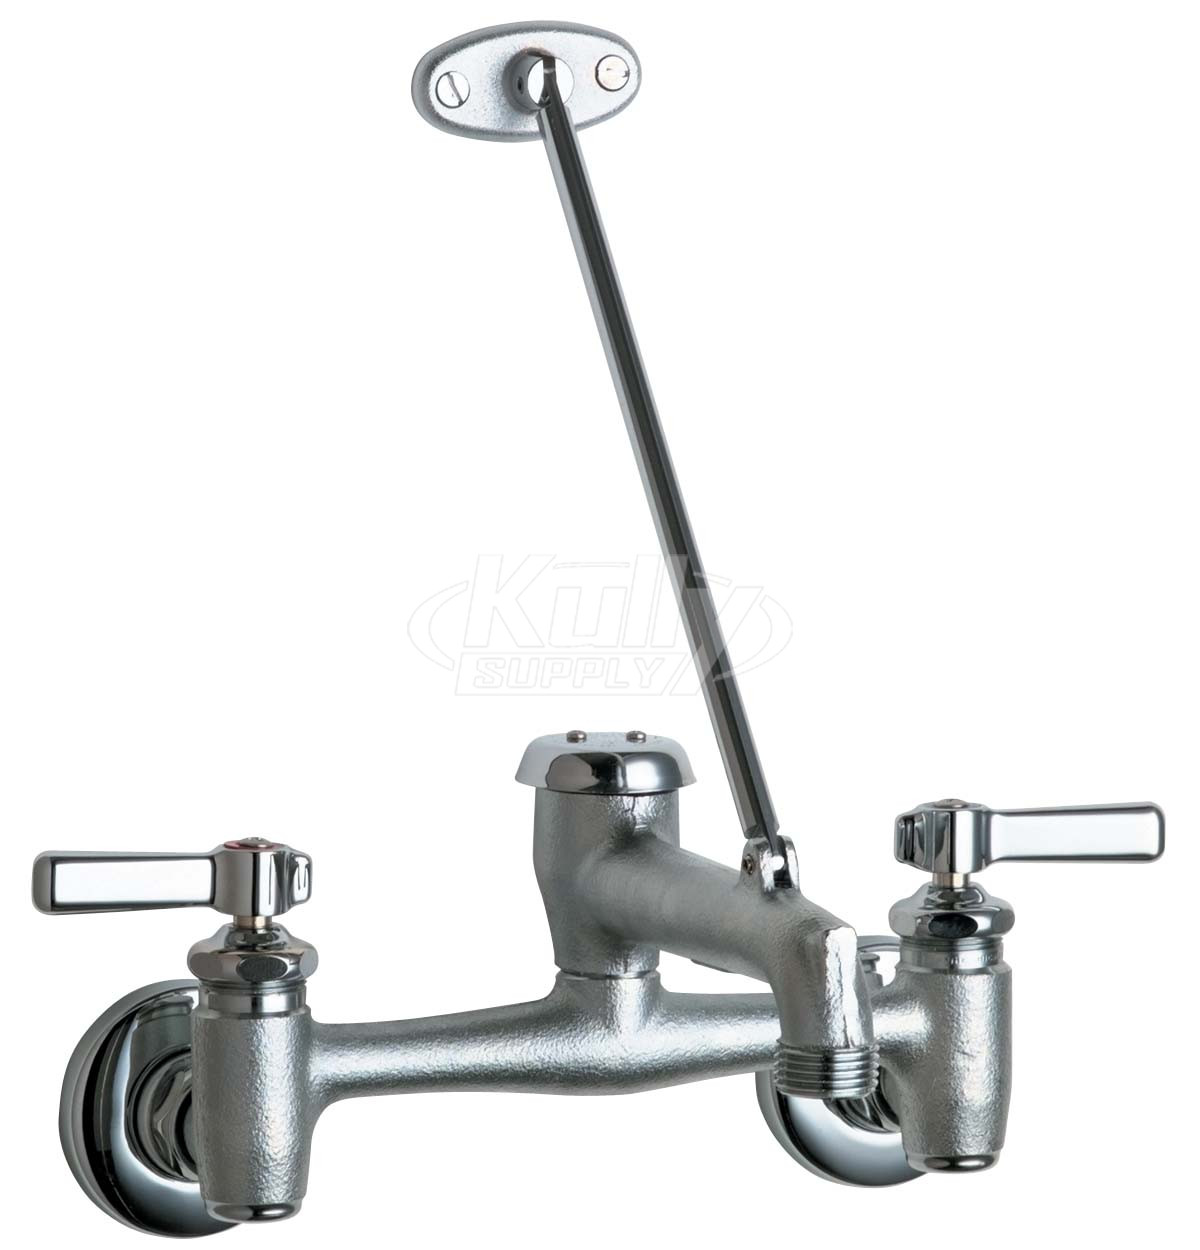 Chicago 897-RCF Service Sink Faucet